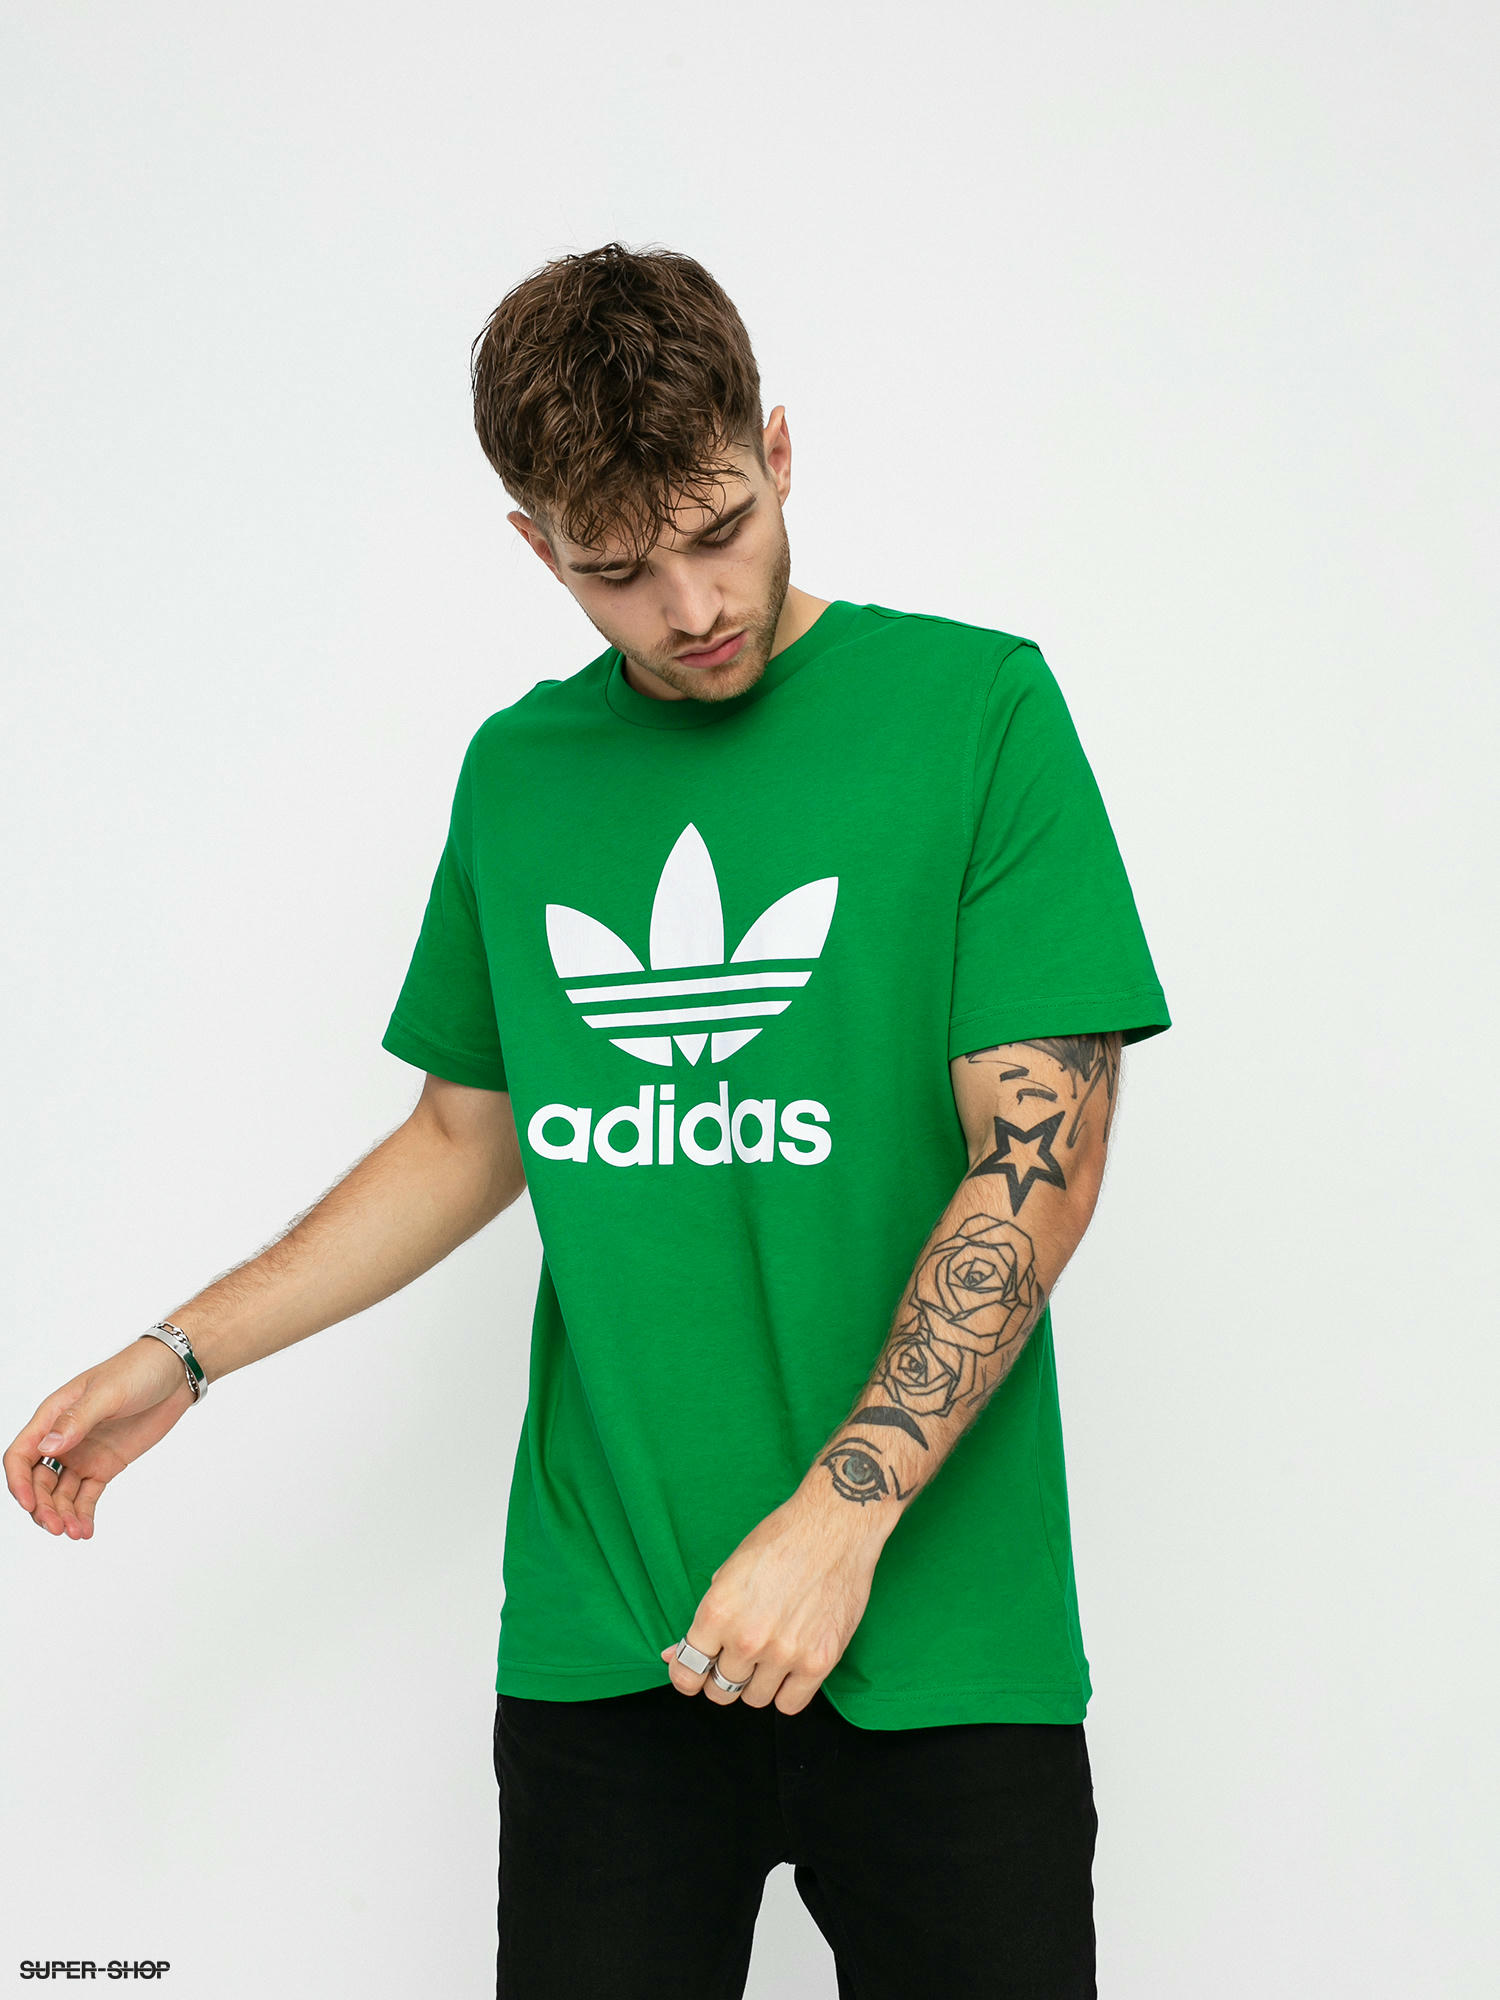 adidas green and white t shirt